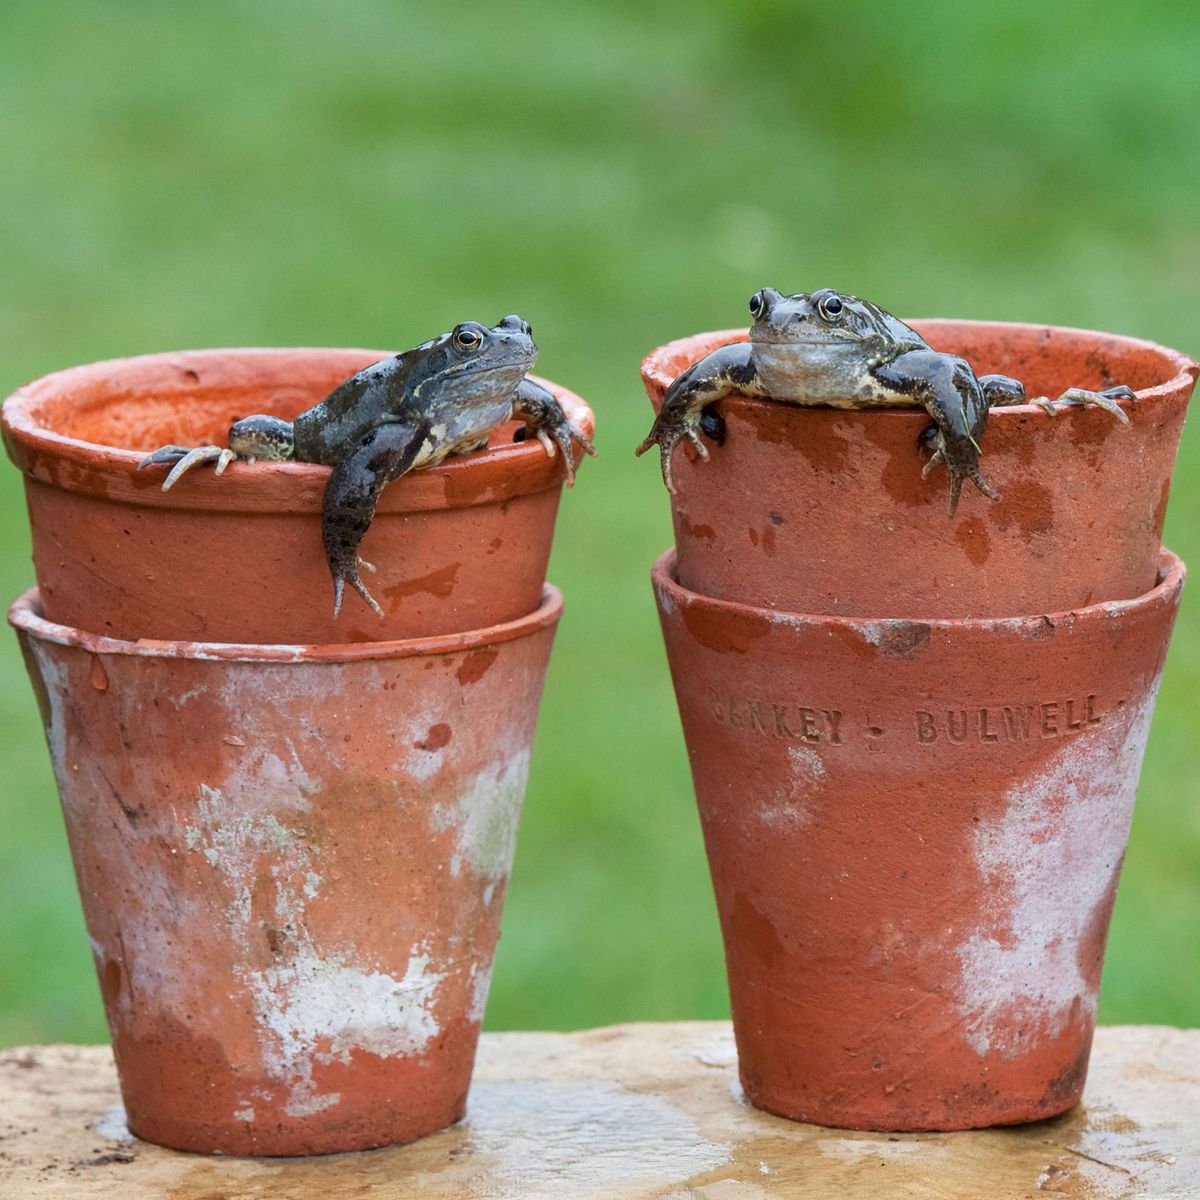 Best Plants For Frogs: 7 Plant Varieties To Bring More Froggies To Your Yard